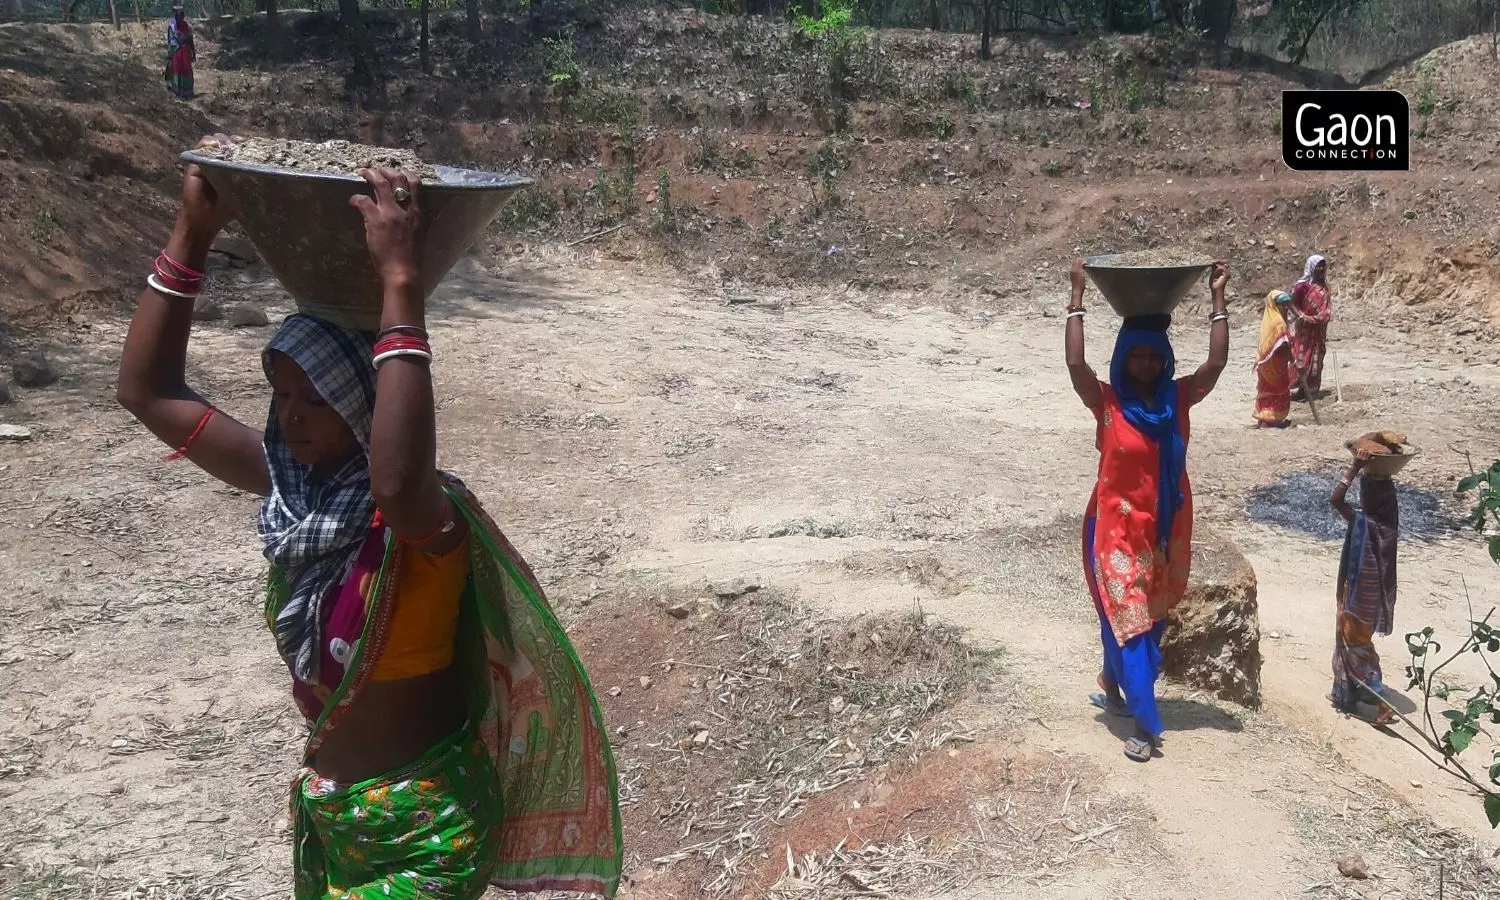 Inter-cropping under the MGNREGA convergence scheme is providing livelihoods and improving health in Jharkhand